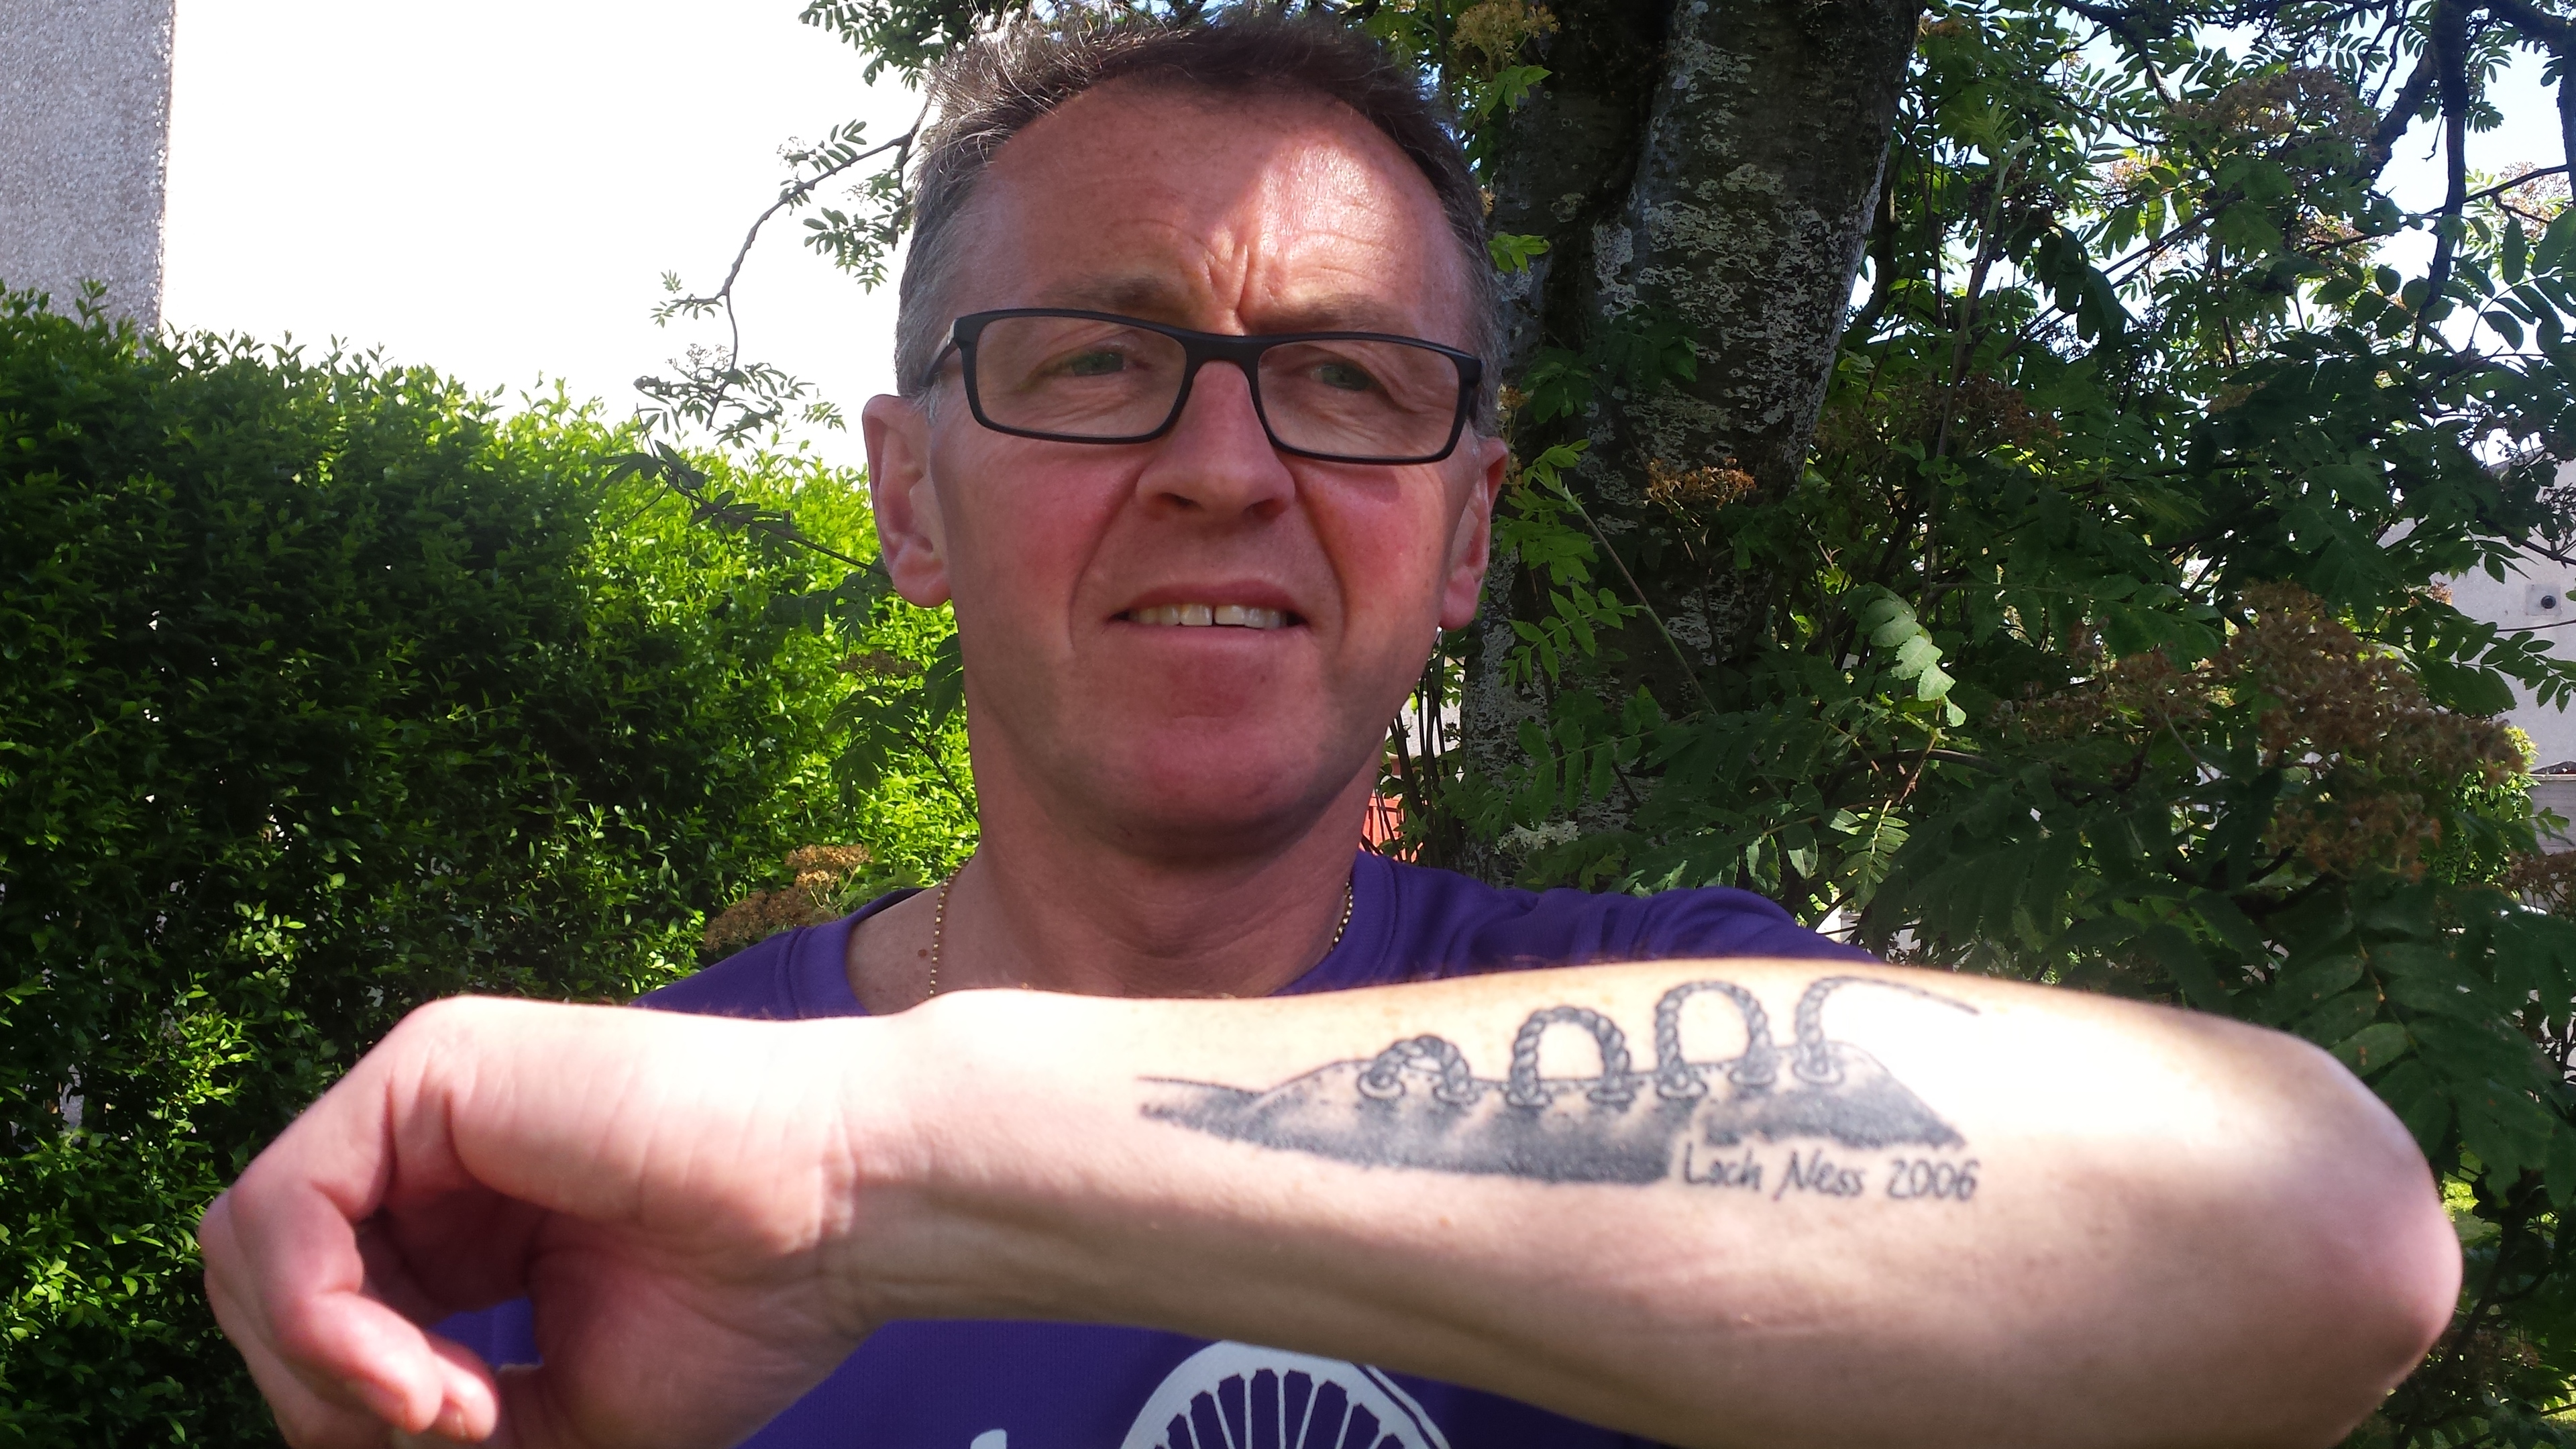 Fitness fanatic has his first ever Loch Ness marathon tattooed on his arm